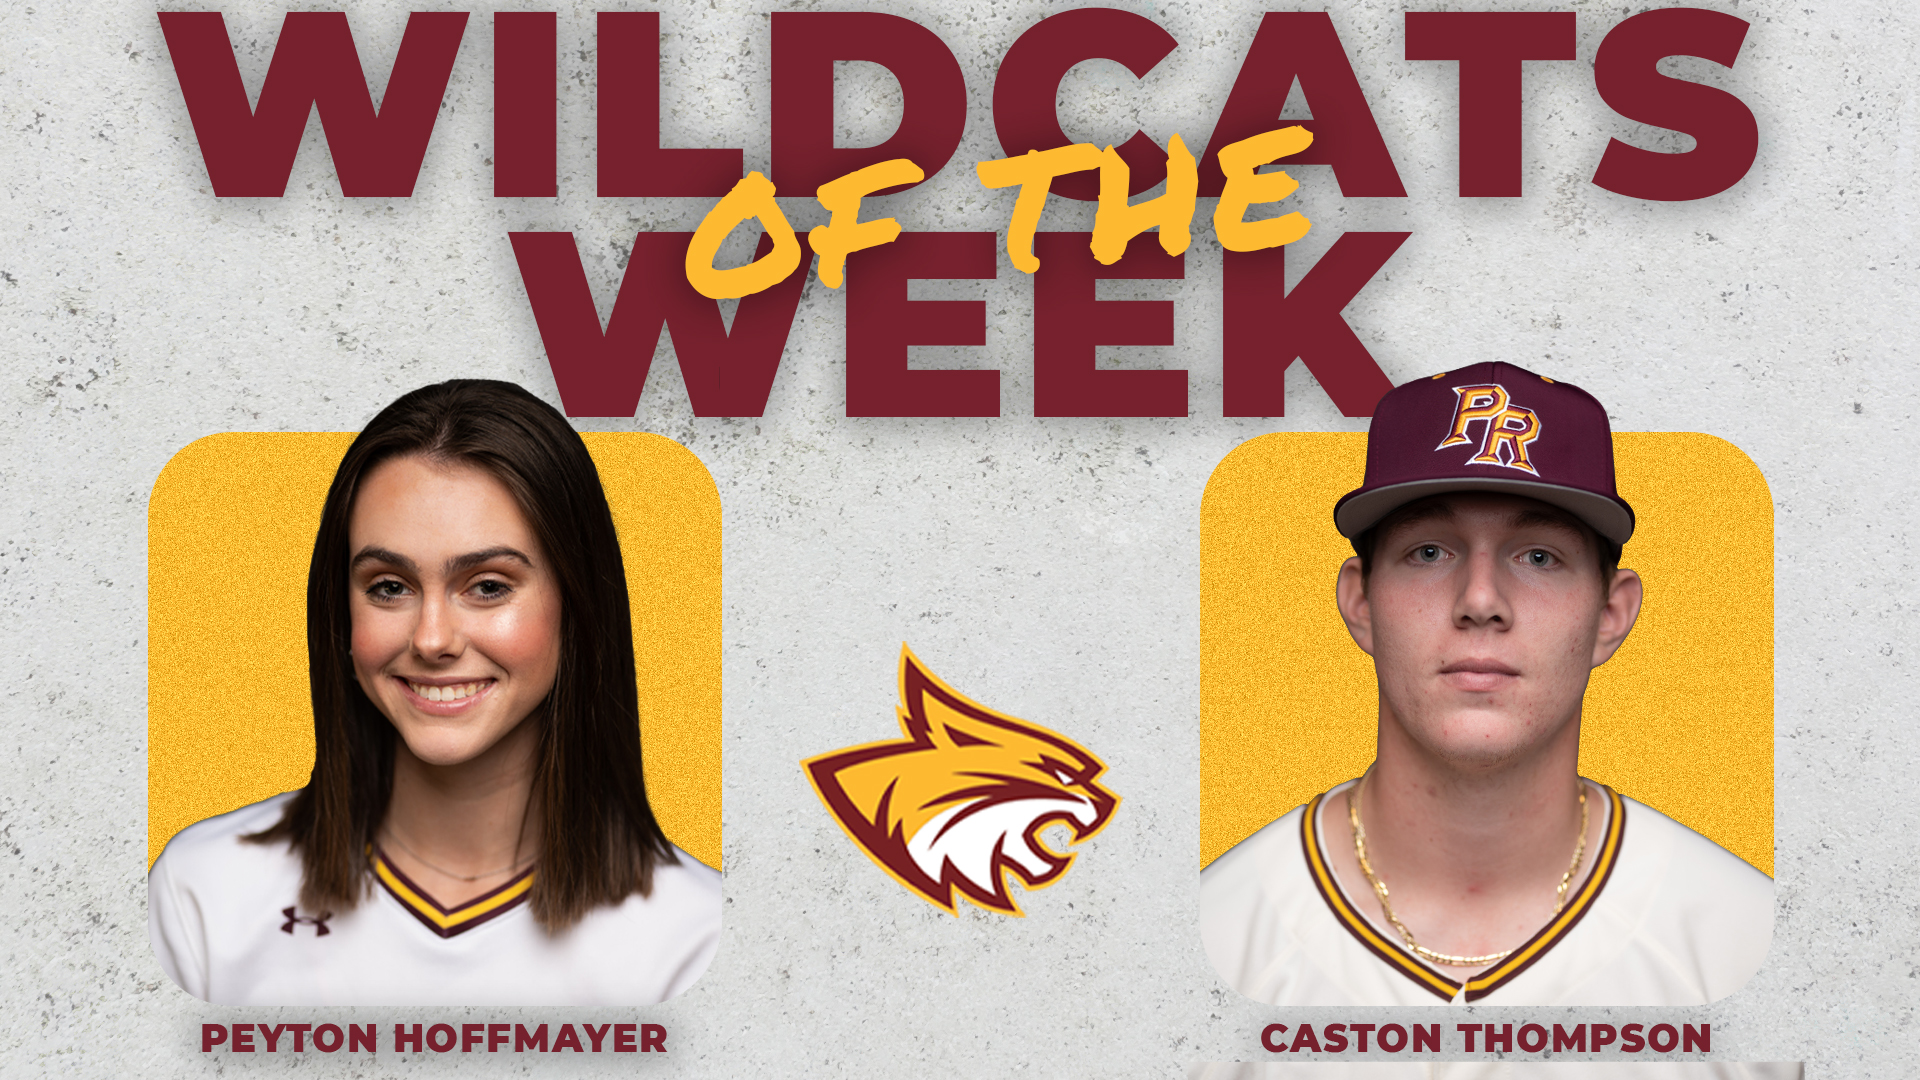 Peyton Hoffmayer, Caston Thompson named Wildcats of the Week